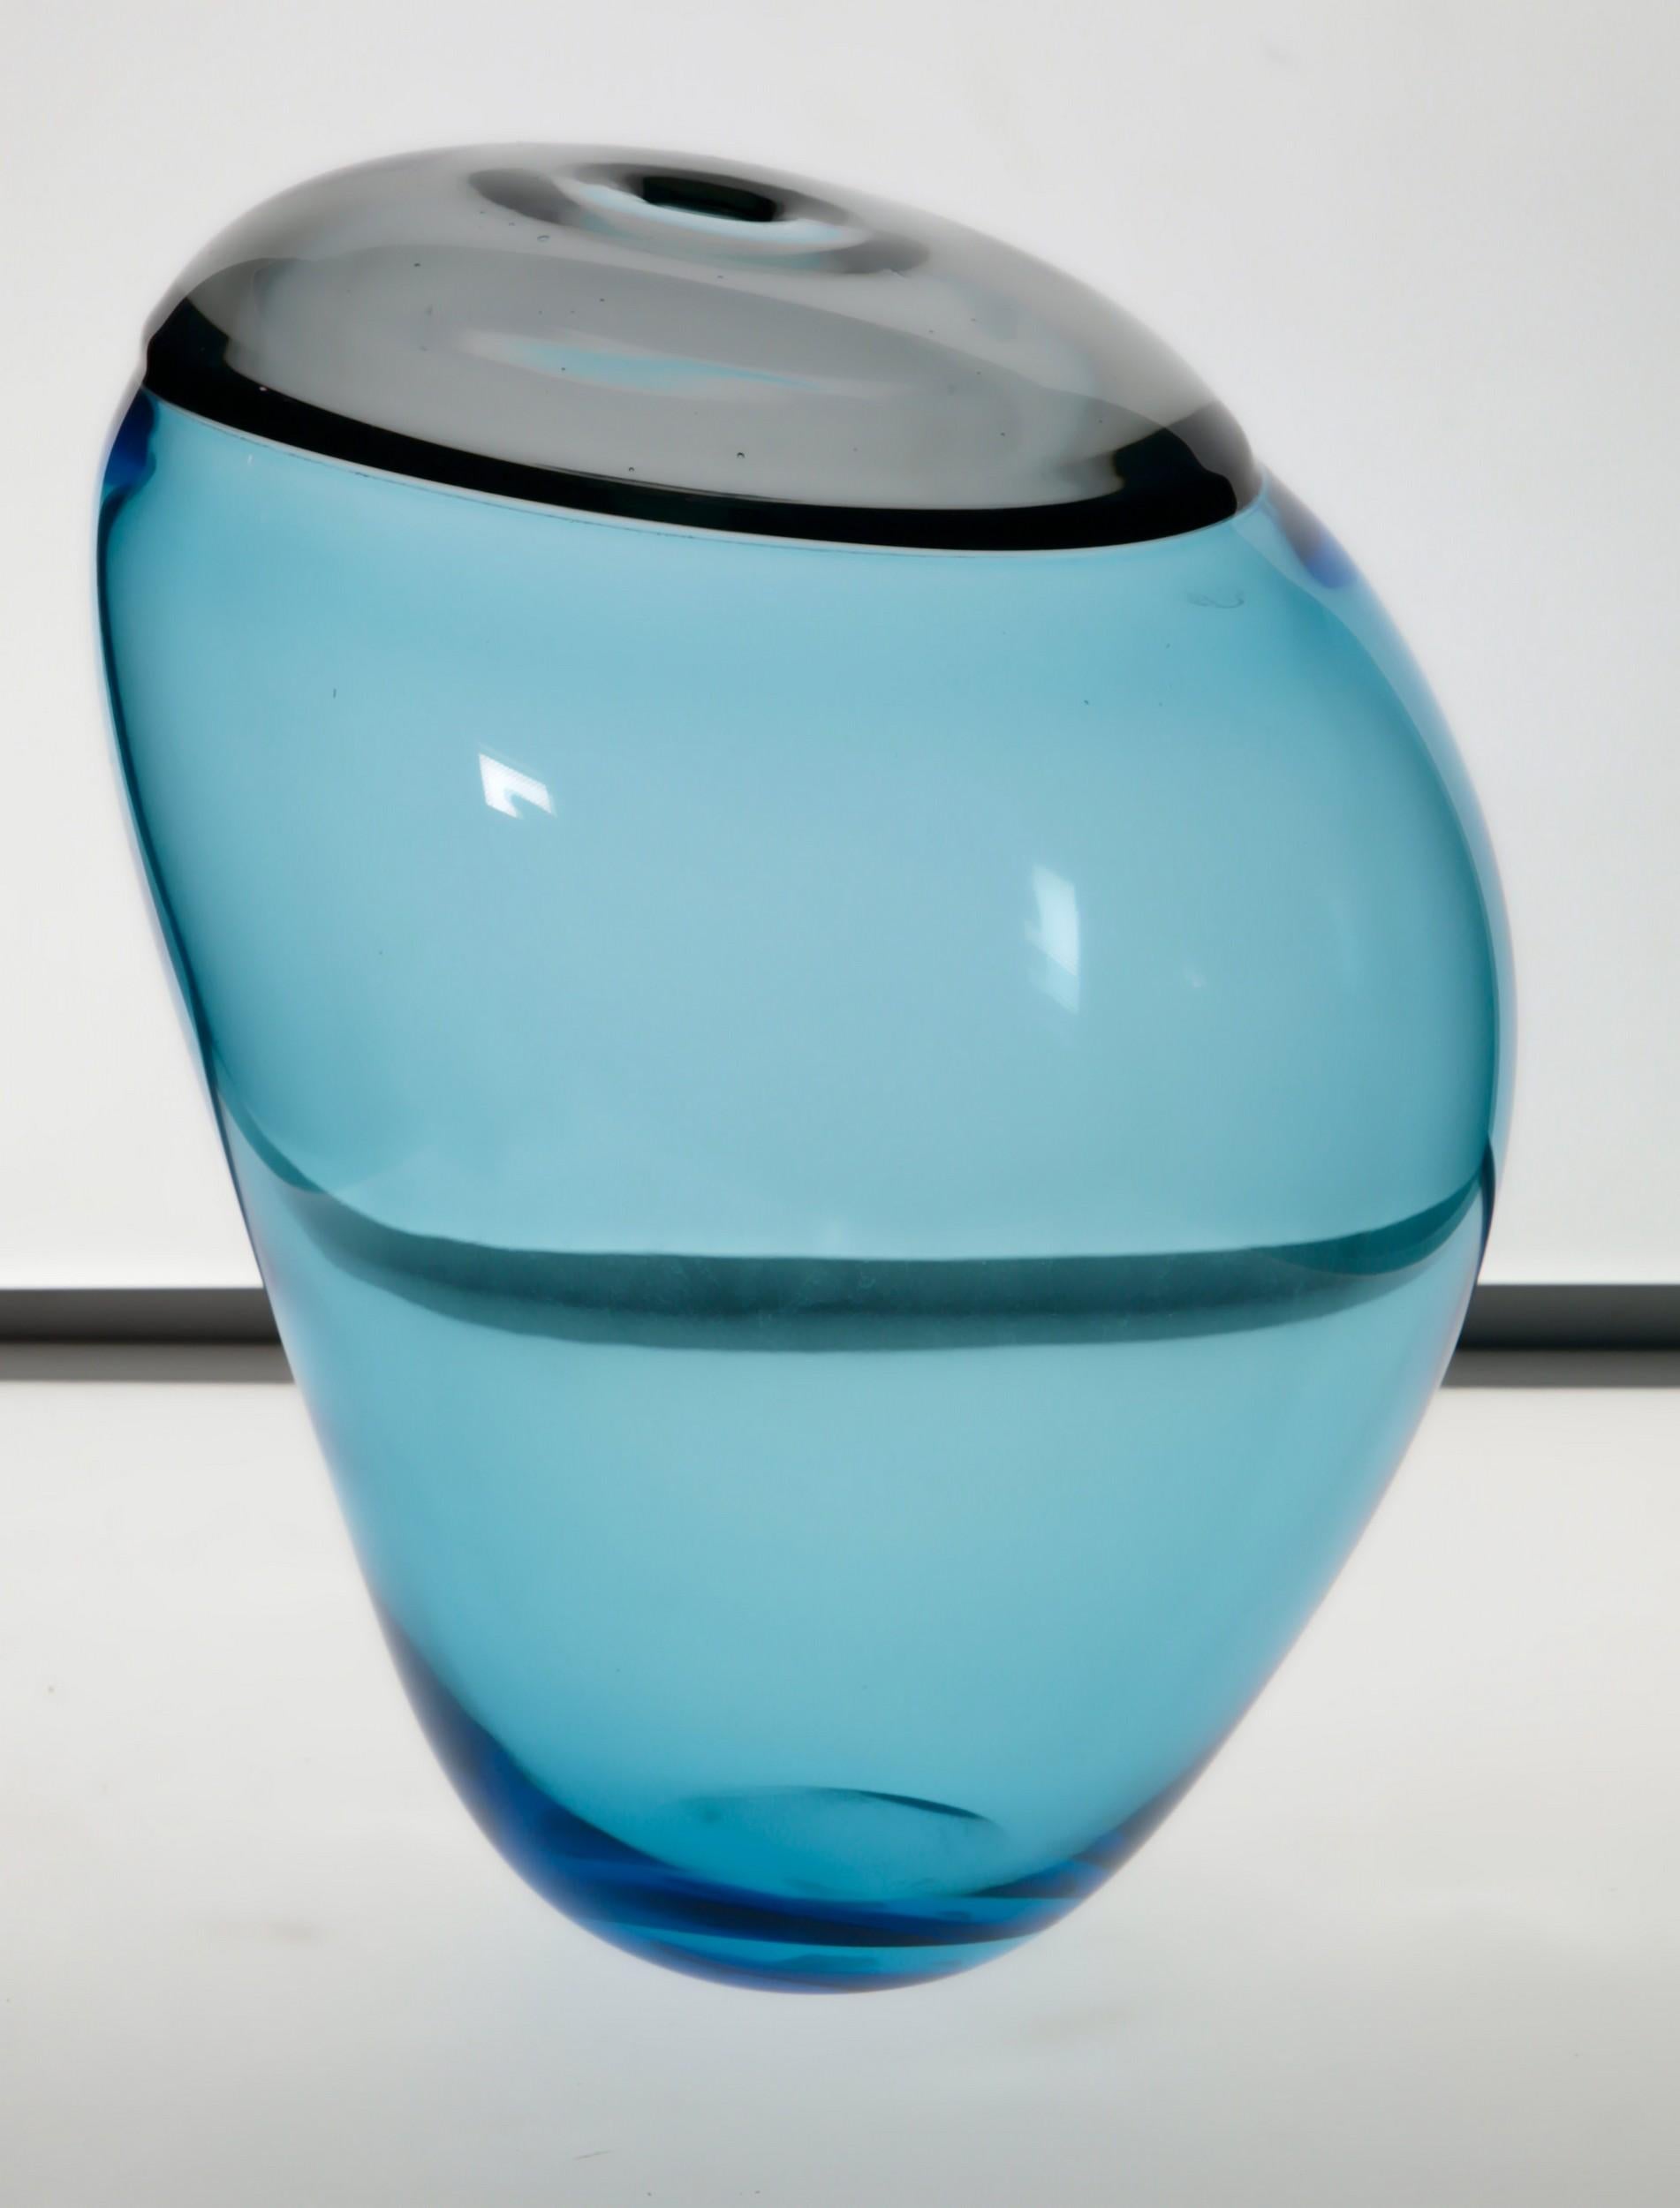 Paolo Crepax asimmetrico vase. The vase made of two separate parts joined together called incalmo. The main part is in Bluino, the upper part is in Grigio Acciaio (a warm gray). 

Paolo is famous for his ability with the incalmo technique. He is